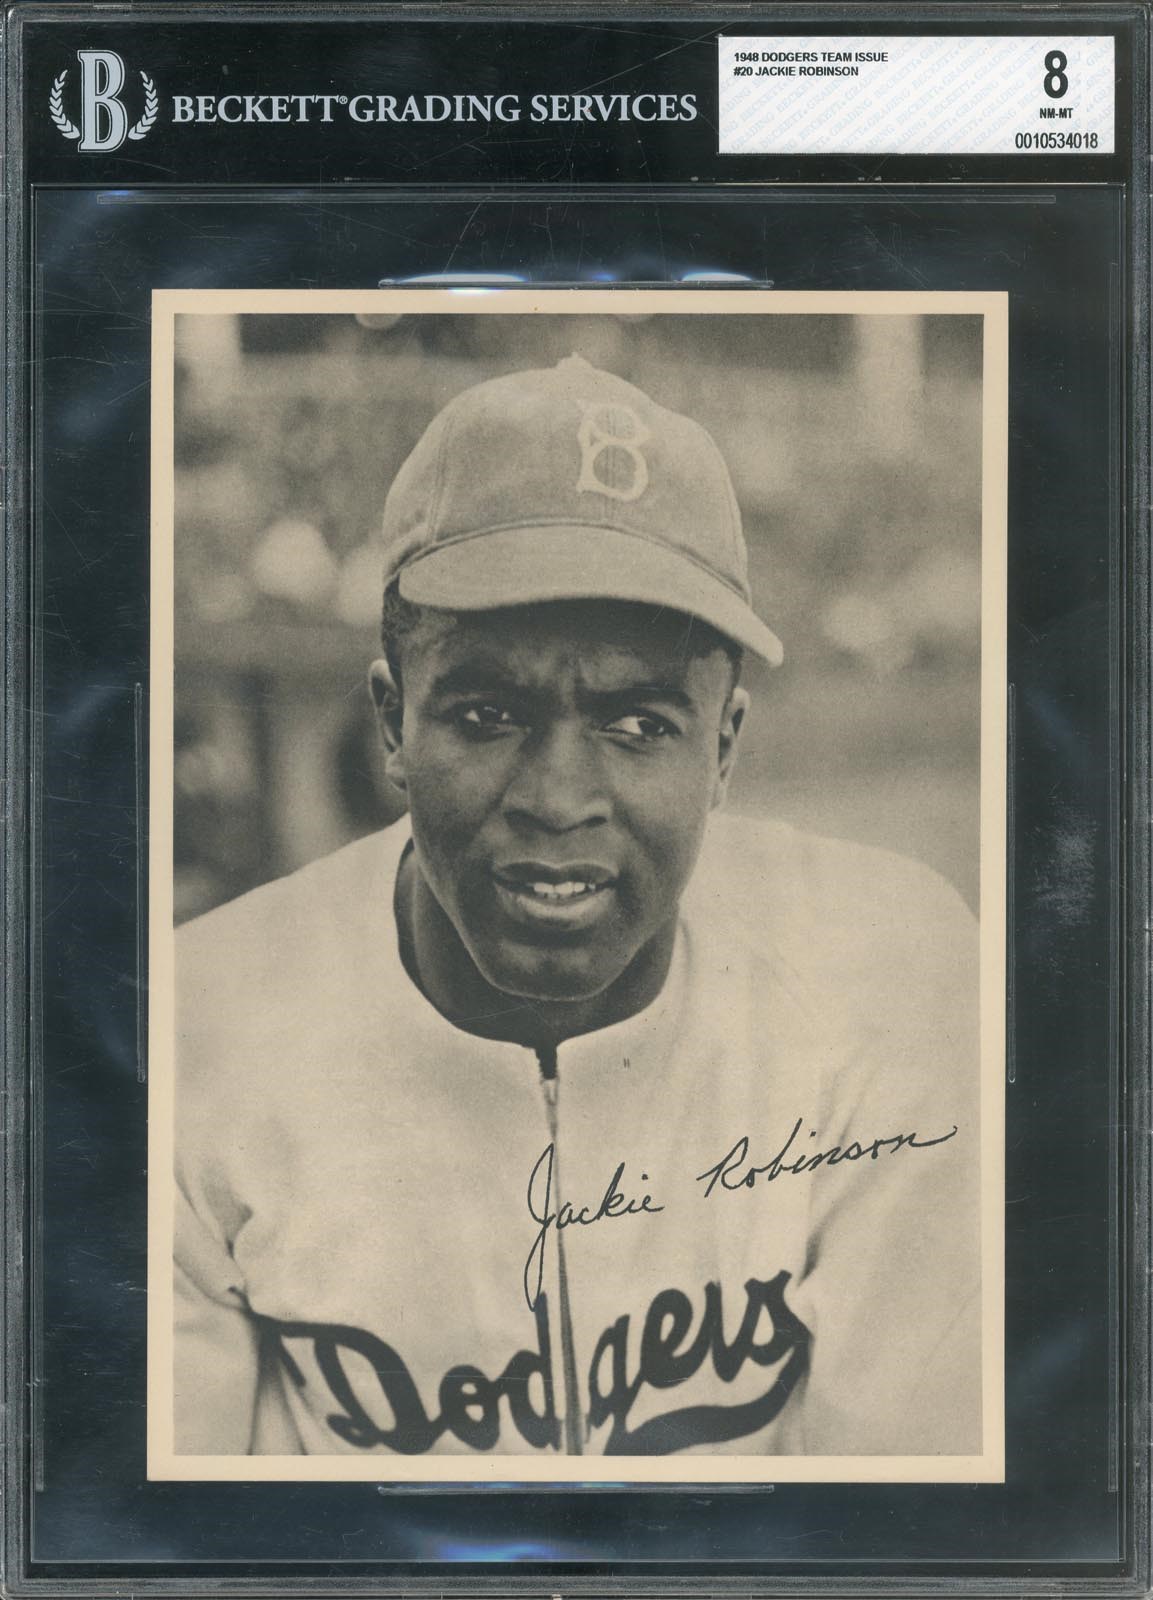 Baseball and Trading Cards - 1948 Dodgers Team Issue #20 Jackie Robinson BGS NM-MT 8 (POP 1 Highest Graded)